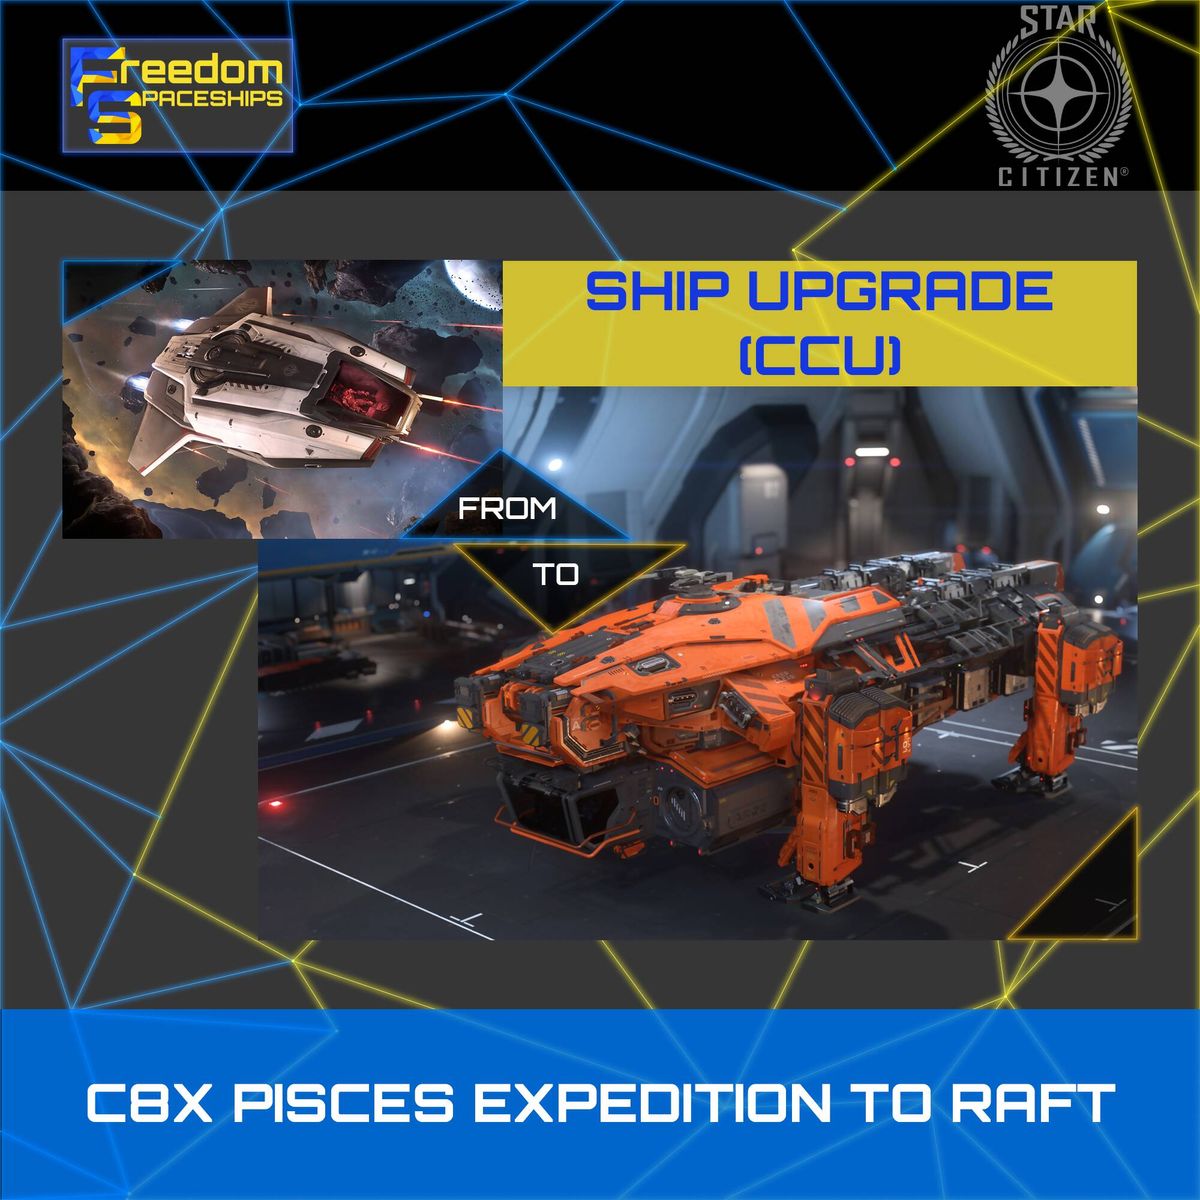 Upgrade - C8X Pisces Expedition to Raft